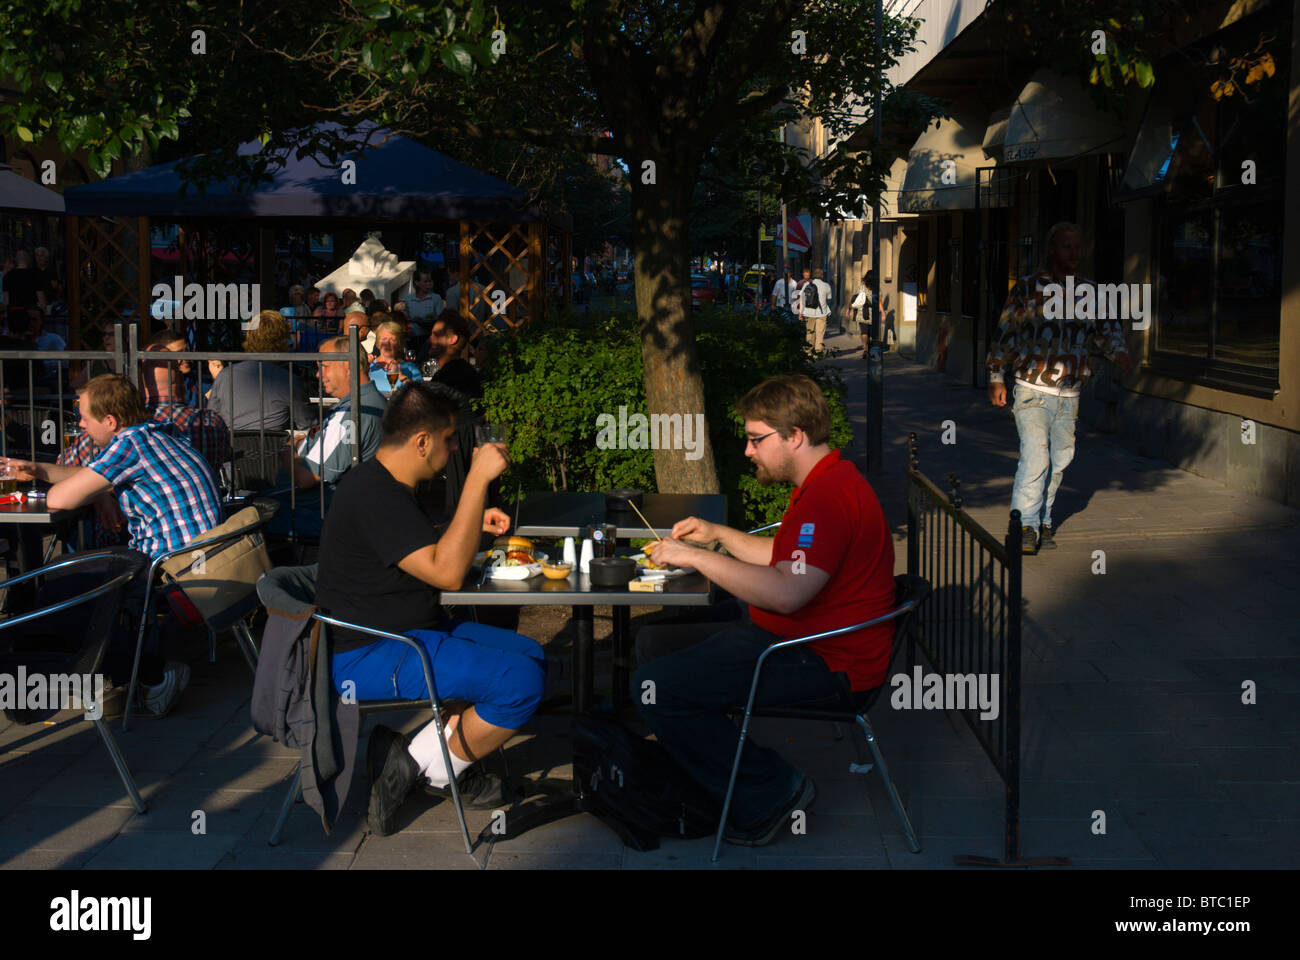 People eating fastfood Södermalm district Stockholm Sweden Europe Stock Photo